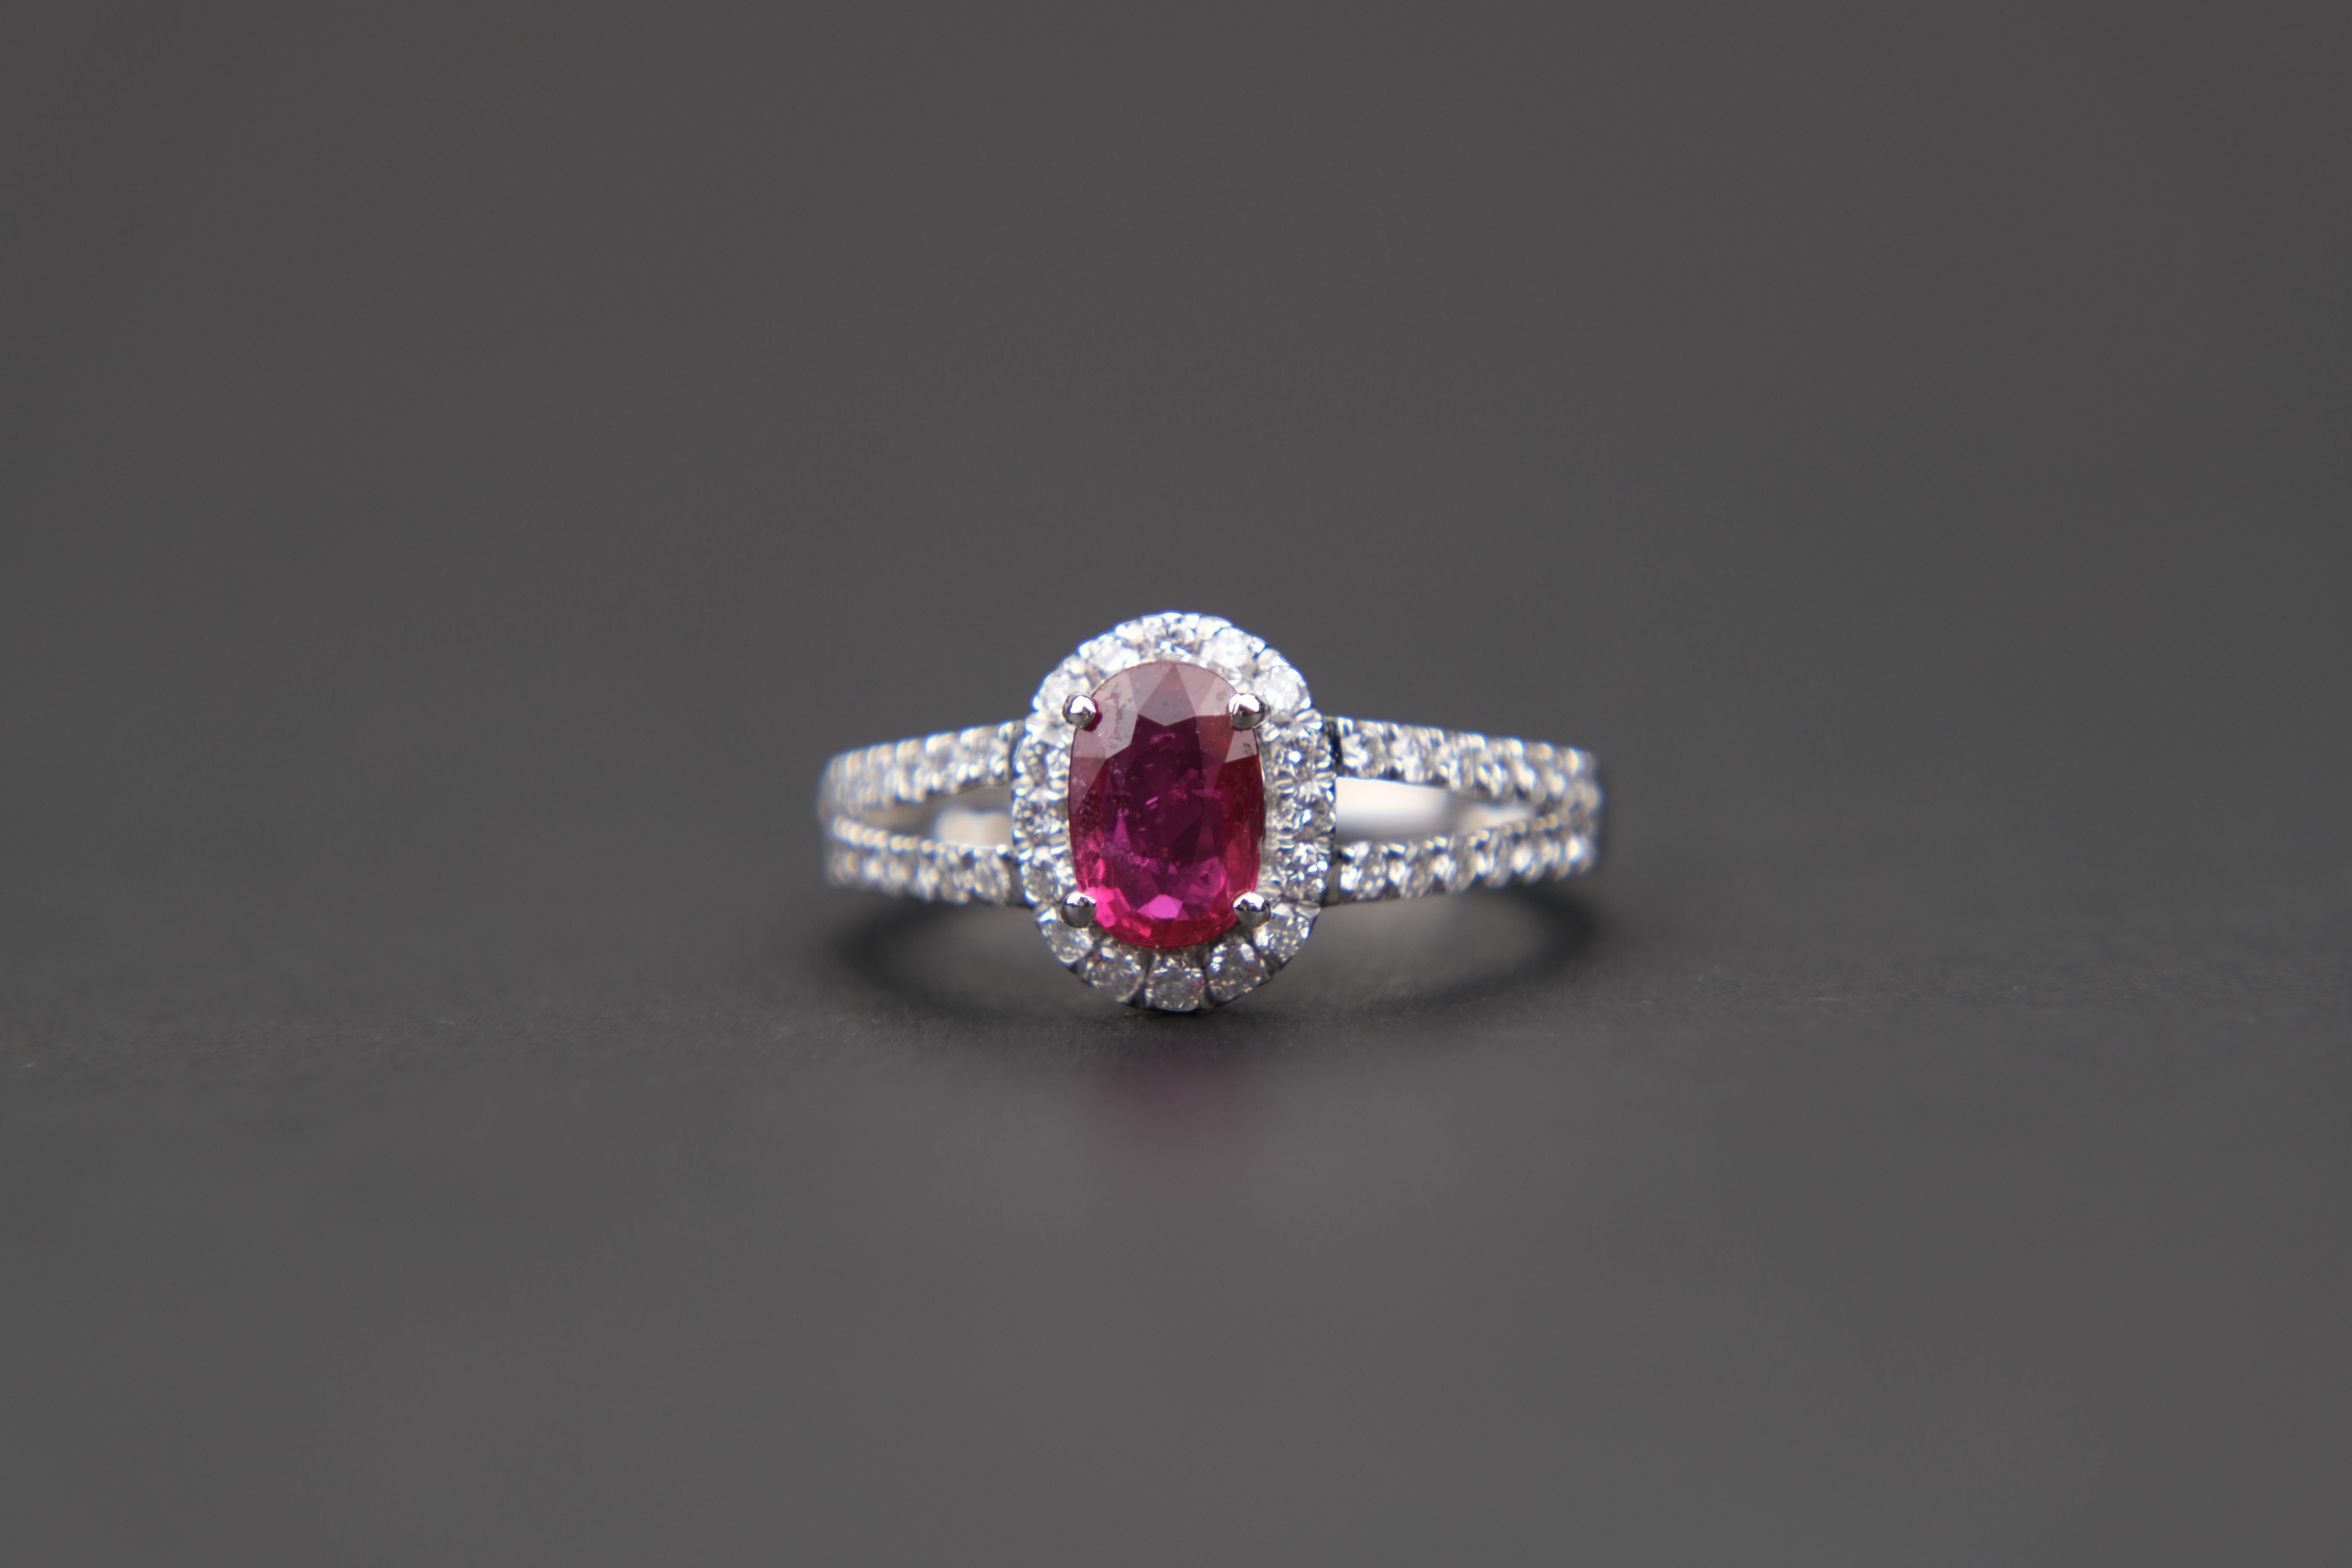 I am late to the appreciation of diamonds but I have always been a admirer of sapphires and by extension rubies.

During a chat with a well-known gemologist recently, I asked about rubies and their current desirability. Imagine my surprise when she